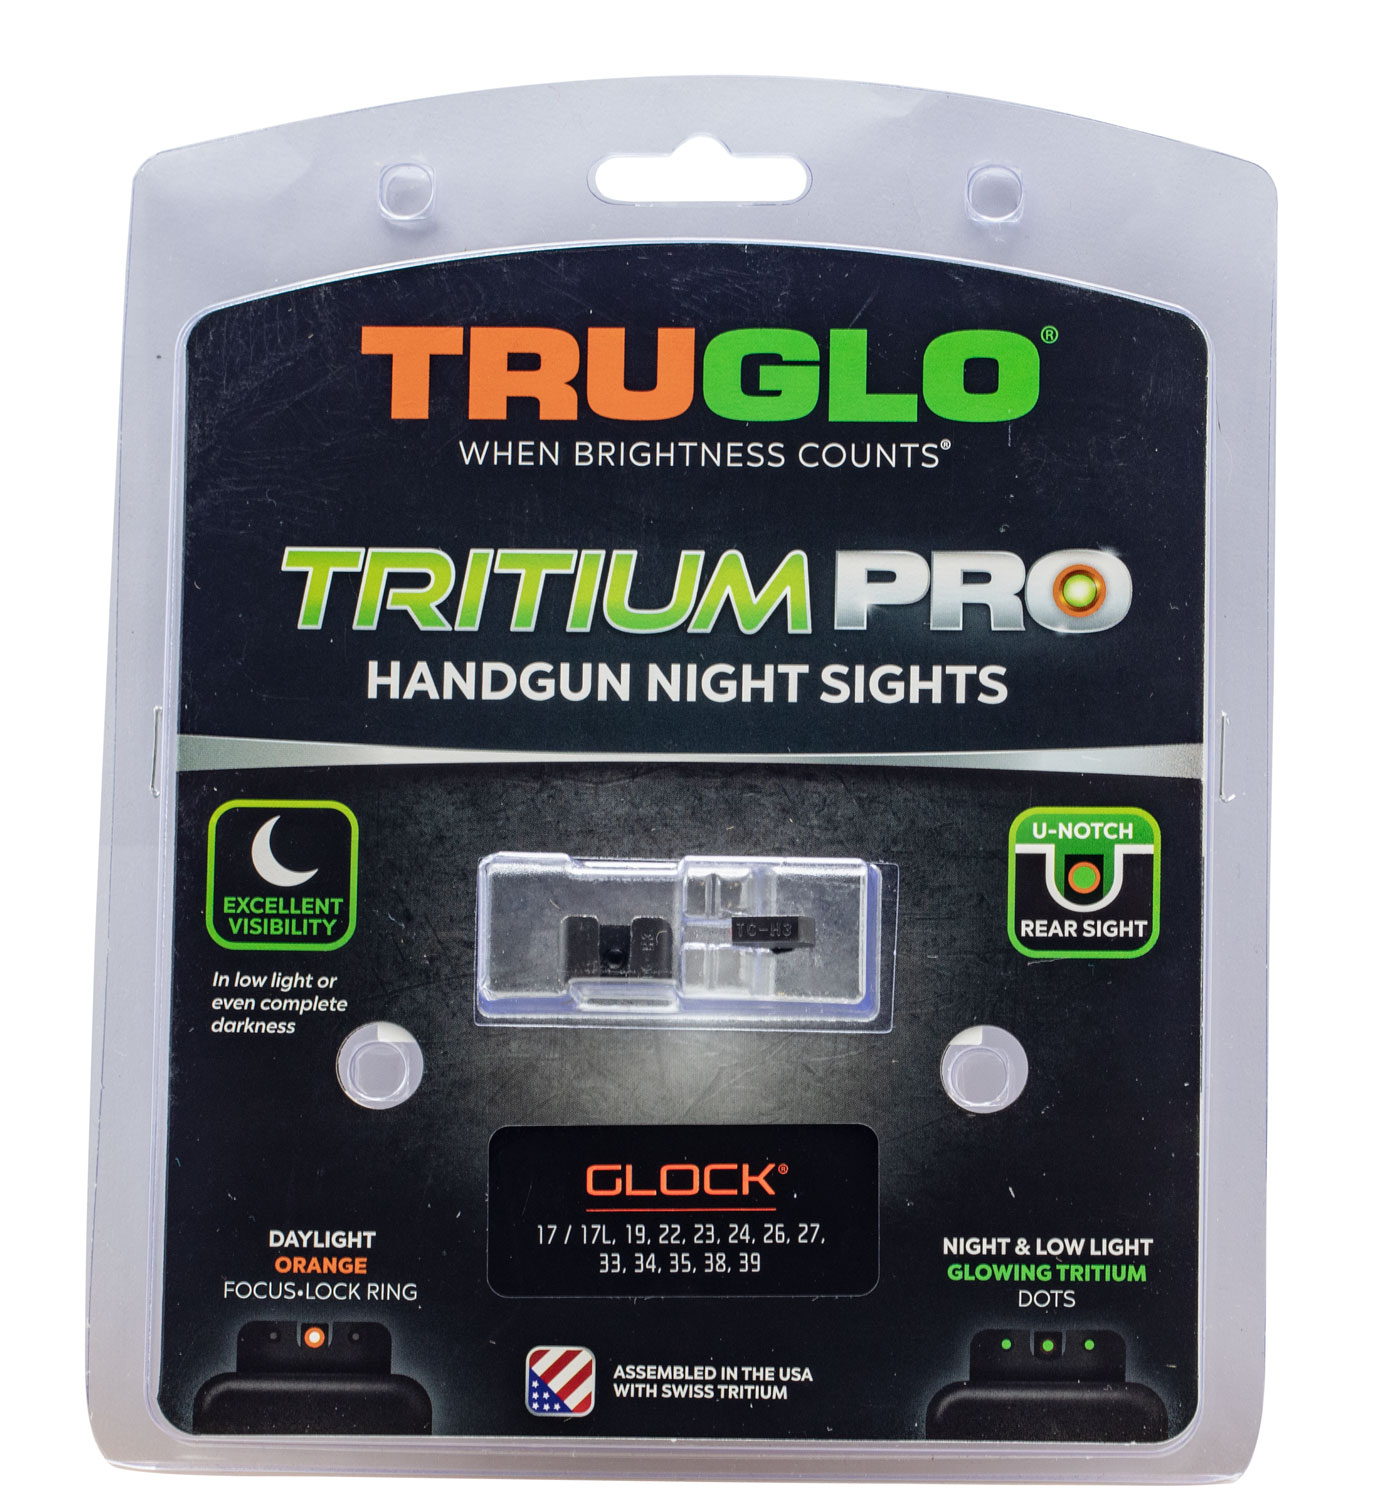 Truglo Tritium Pro Night Low Sight Set - For Glock 17 / 17L 19 22 23 24 26 27 33 34 35 38 39 45 (Excluding M.O.S. models)